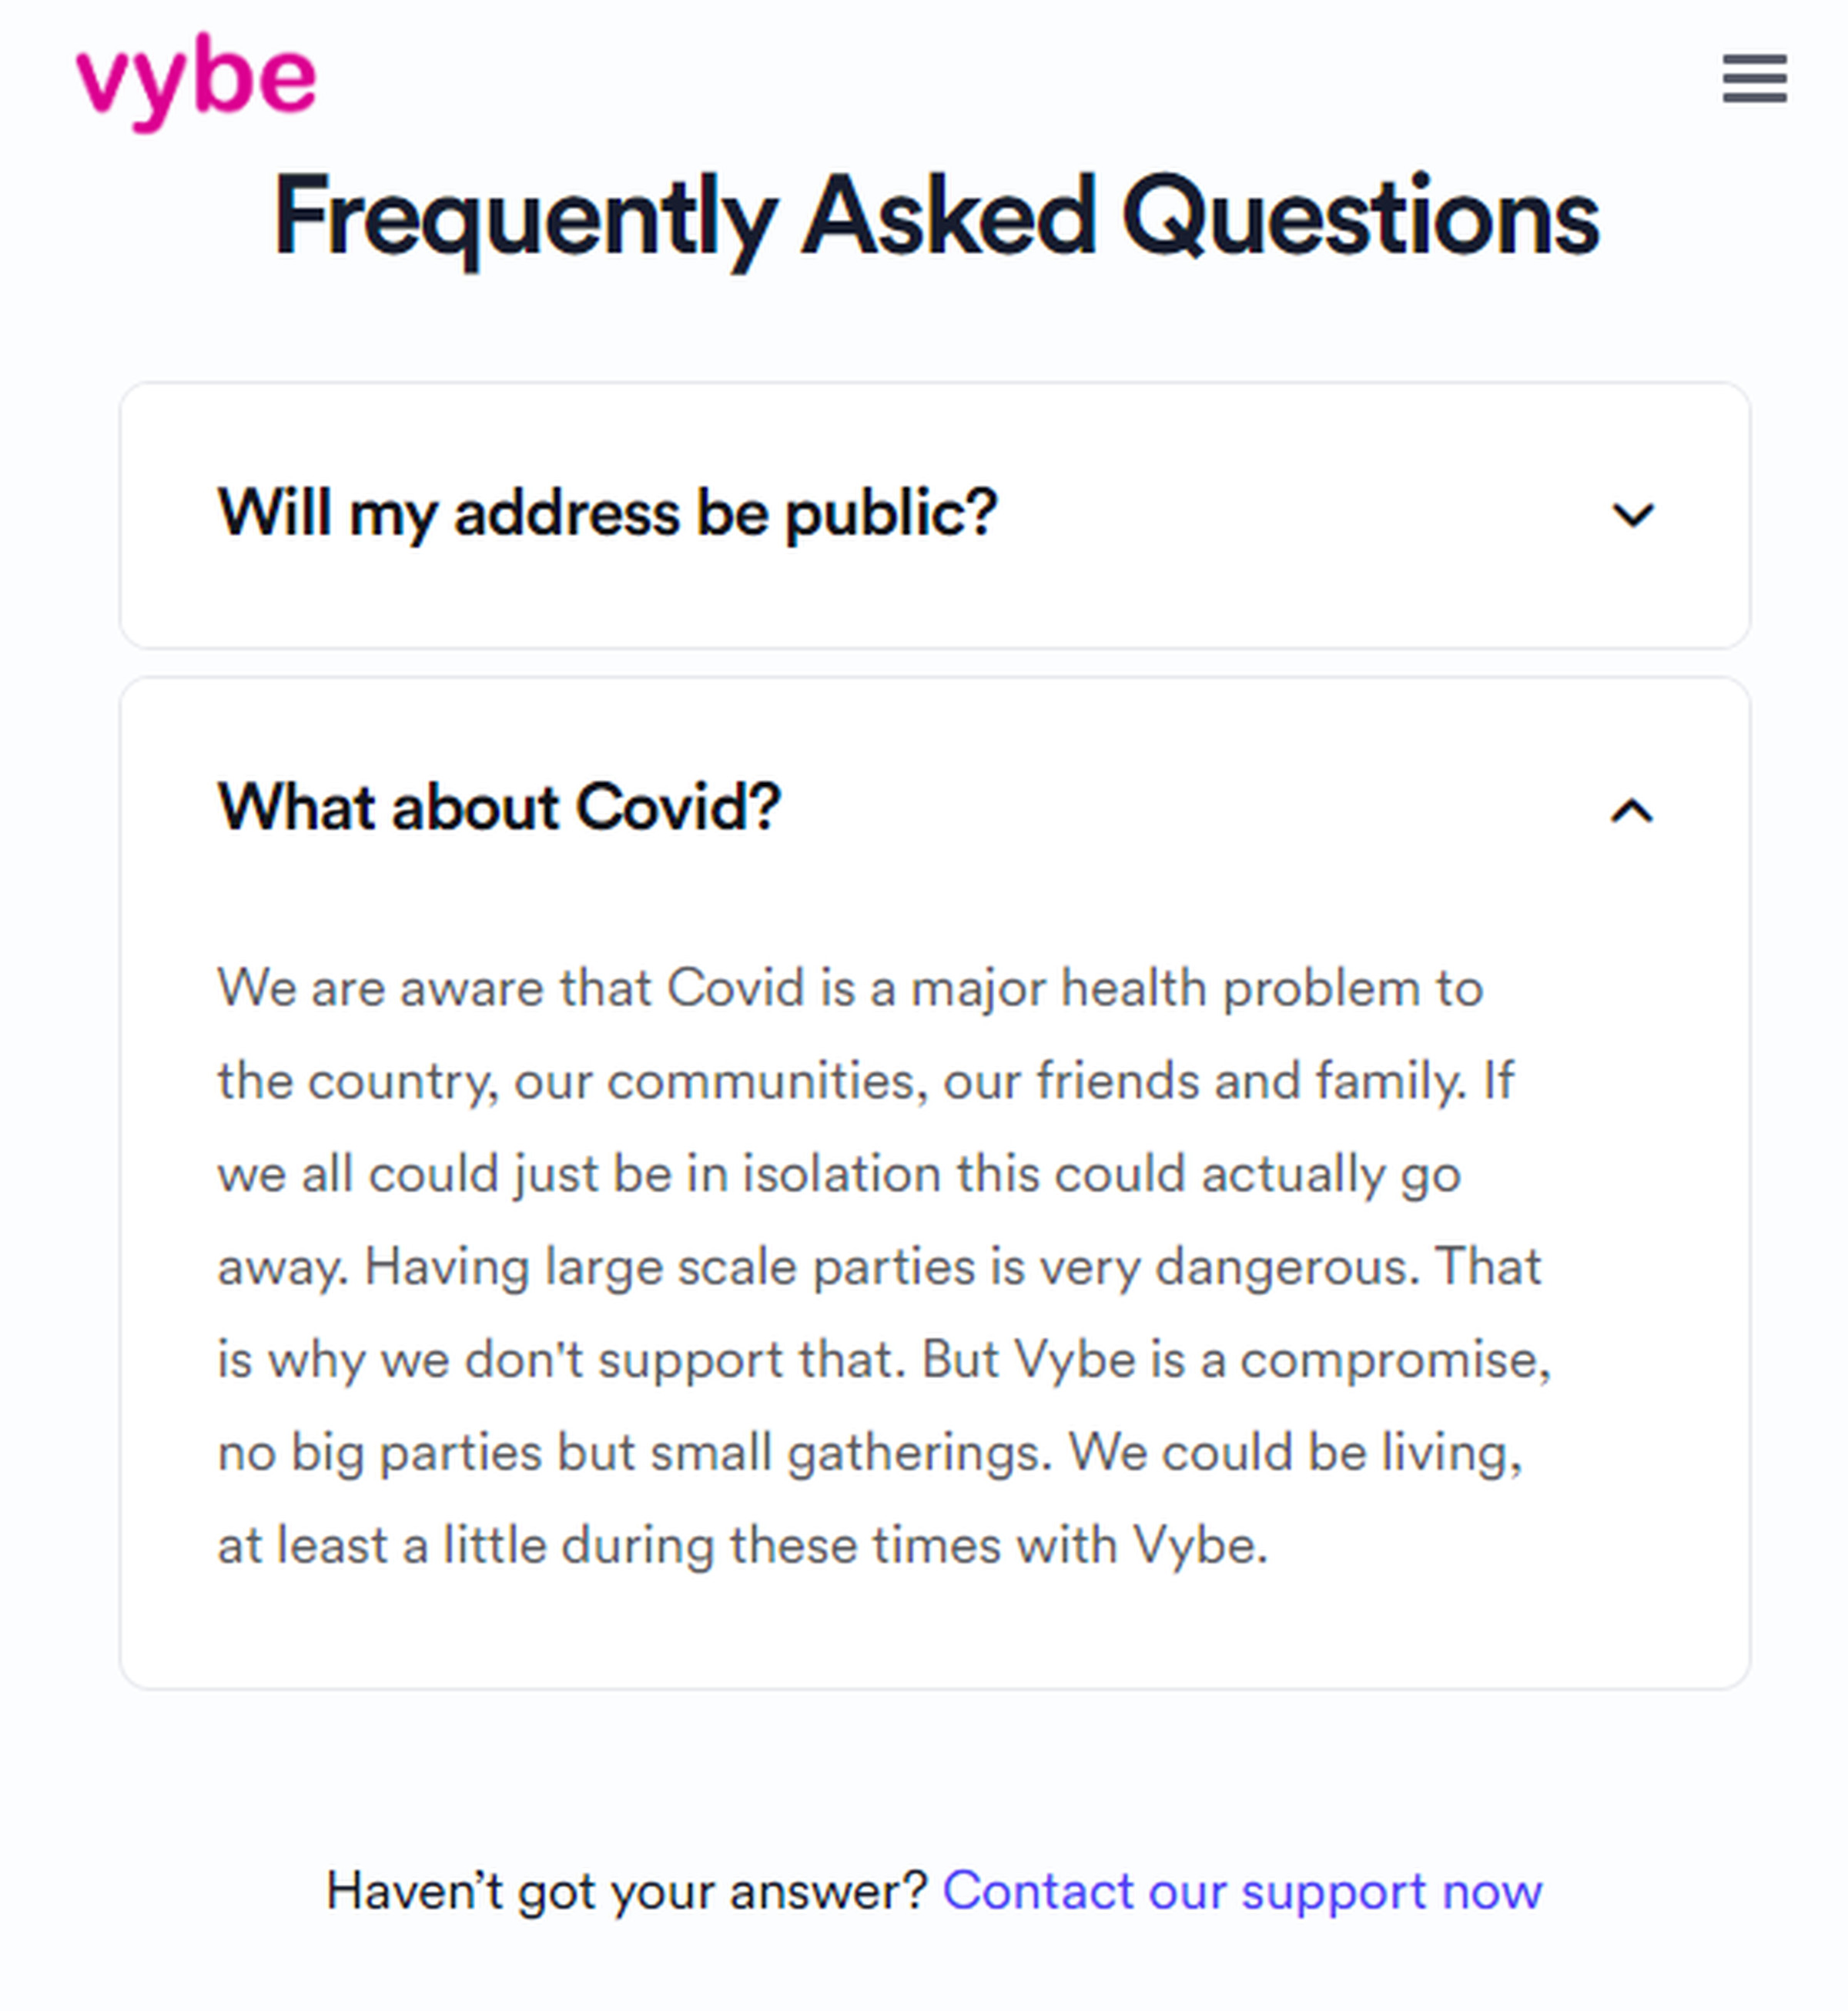 Screenshot of the site’s FAQ reading “We are aware that Covid is a major health problem to the country, our communities, our friends and family. If we all could just be in isolation this could actually go away. Having large scale parties is very dangerous. That is why we don’t support that. But Vybe is a compromise, no big parties but small gatherings. We could be living, at least a little during these times with Vybe.”